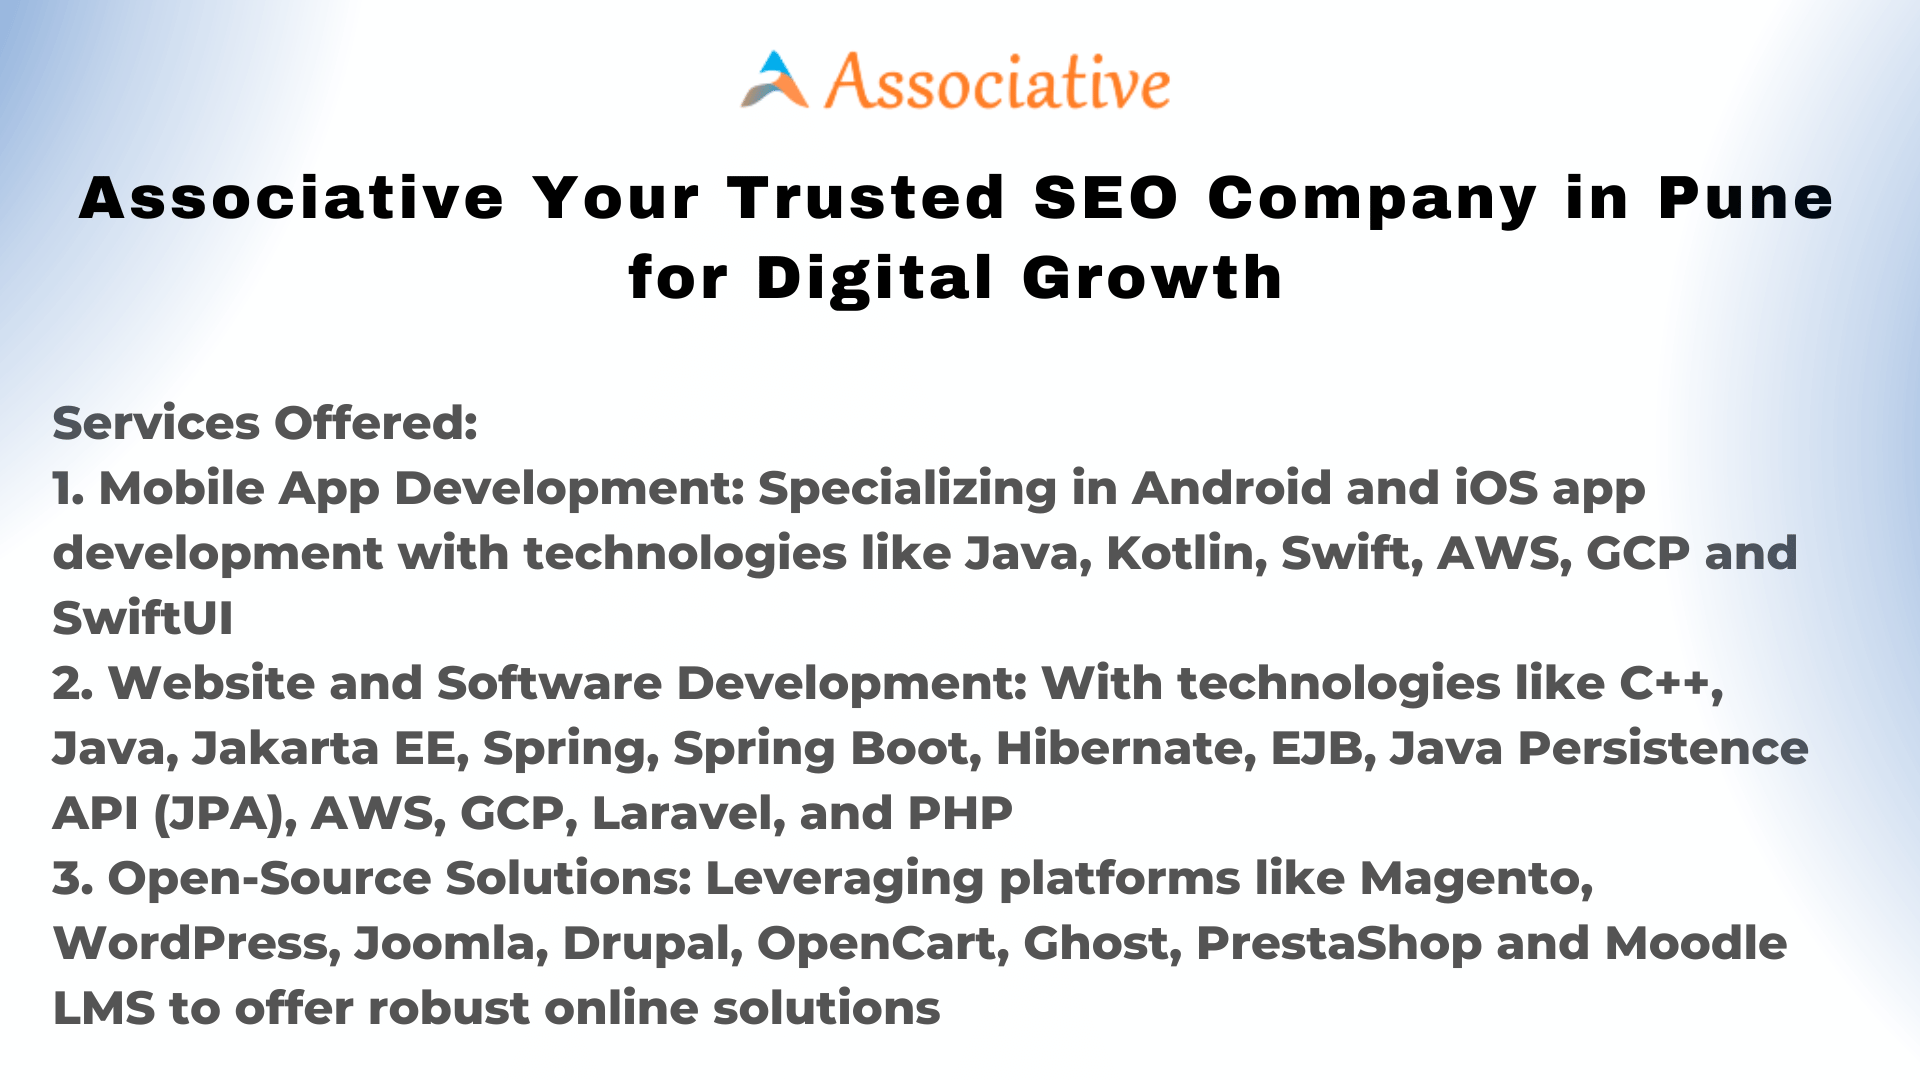 Associative Your Trusted SEO Company in Pune for Digital Growth